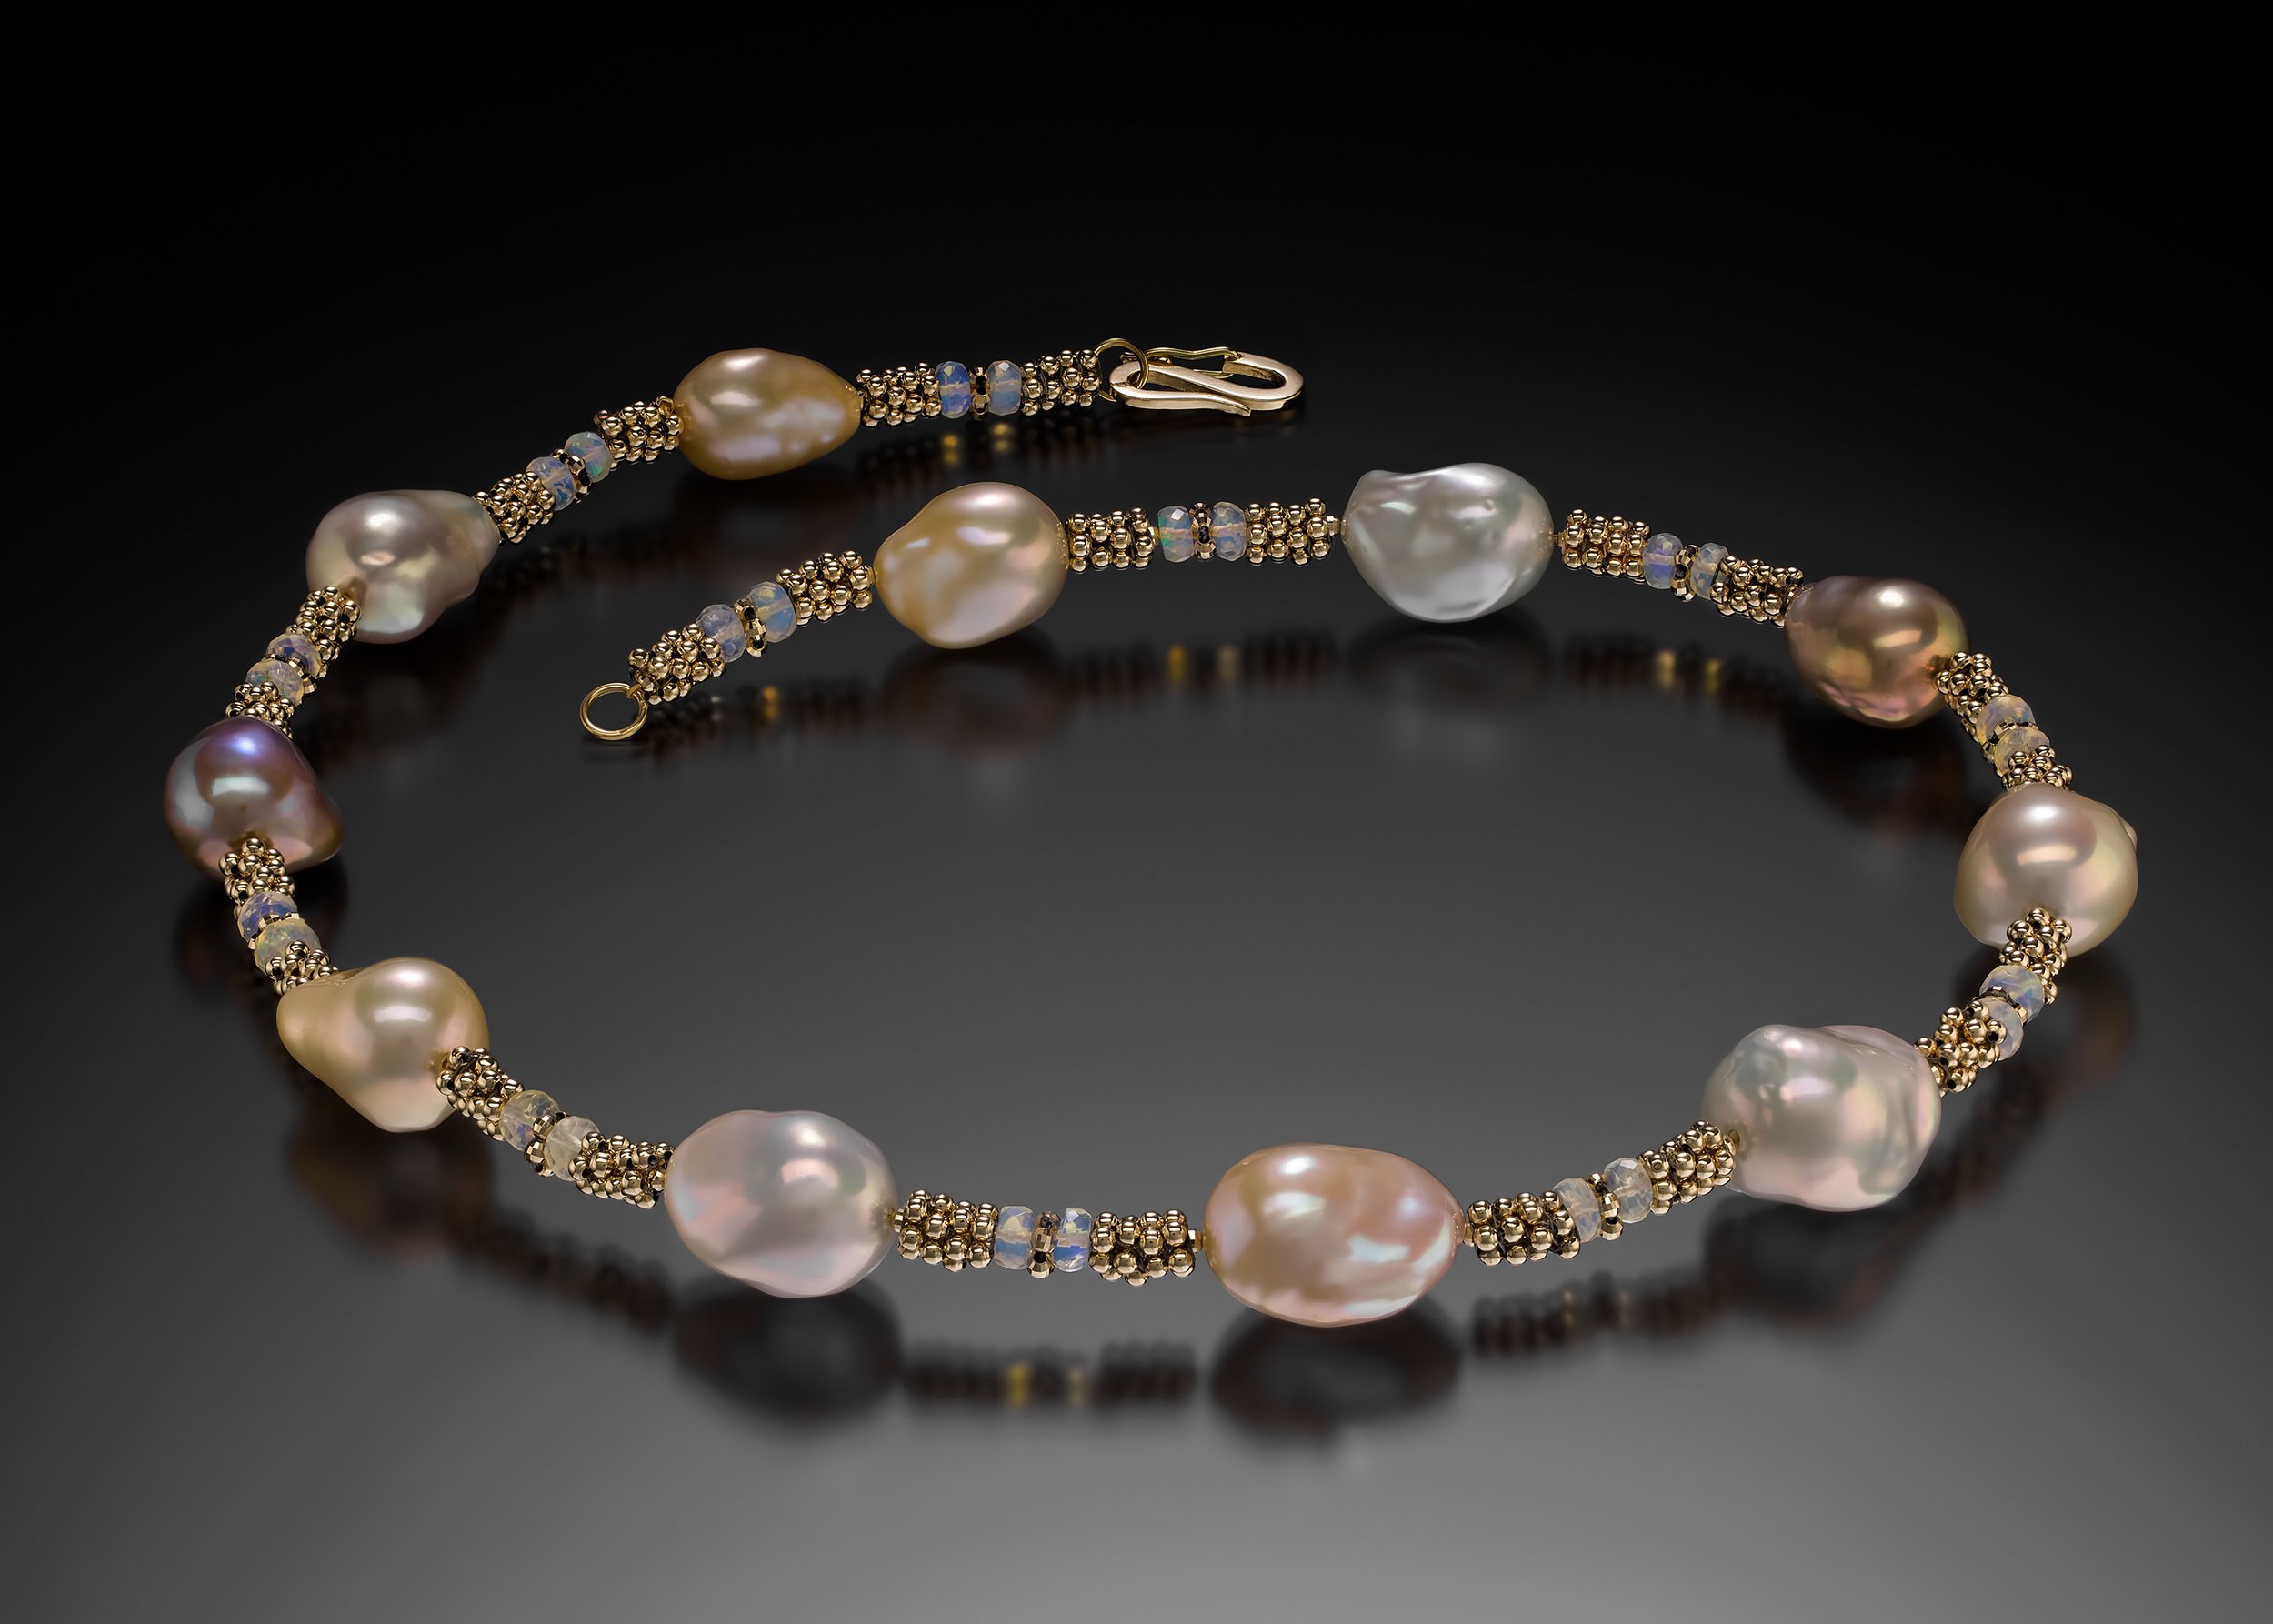 Pearl and Opal Necklace. This necklace is hand woven of 14k gold, and Ethiopian opal beads. Large natural, baroque, pearls are spaced throughout the piece.